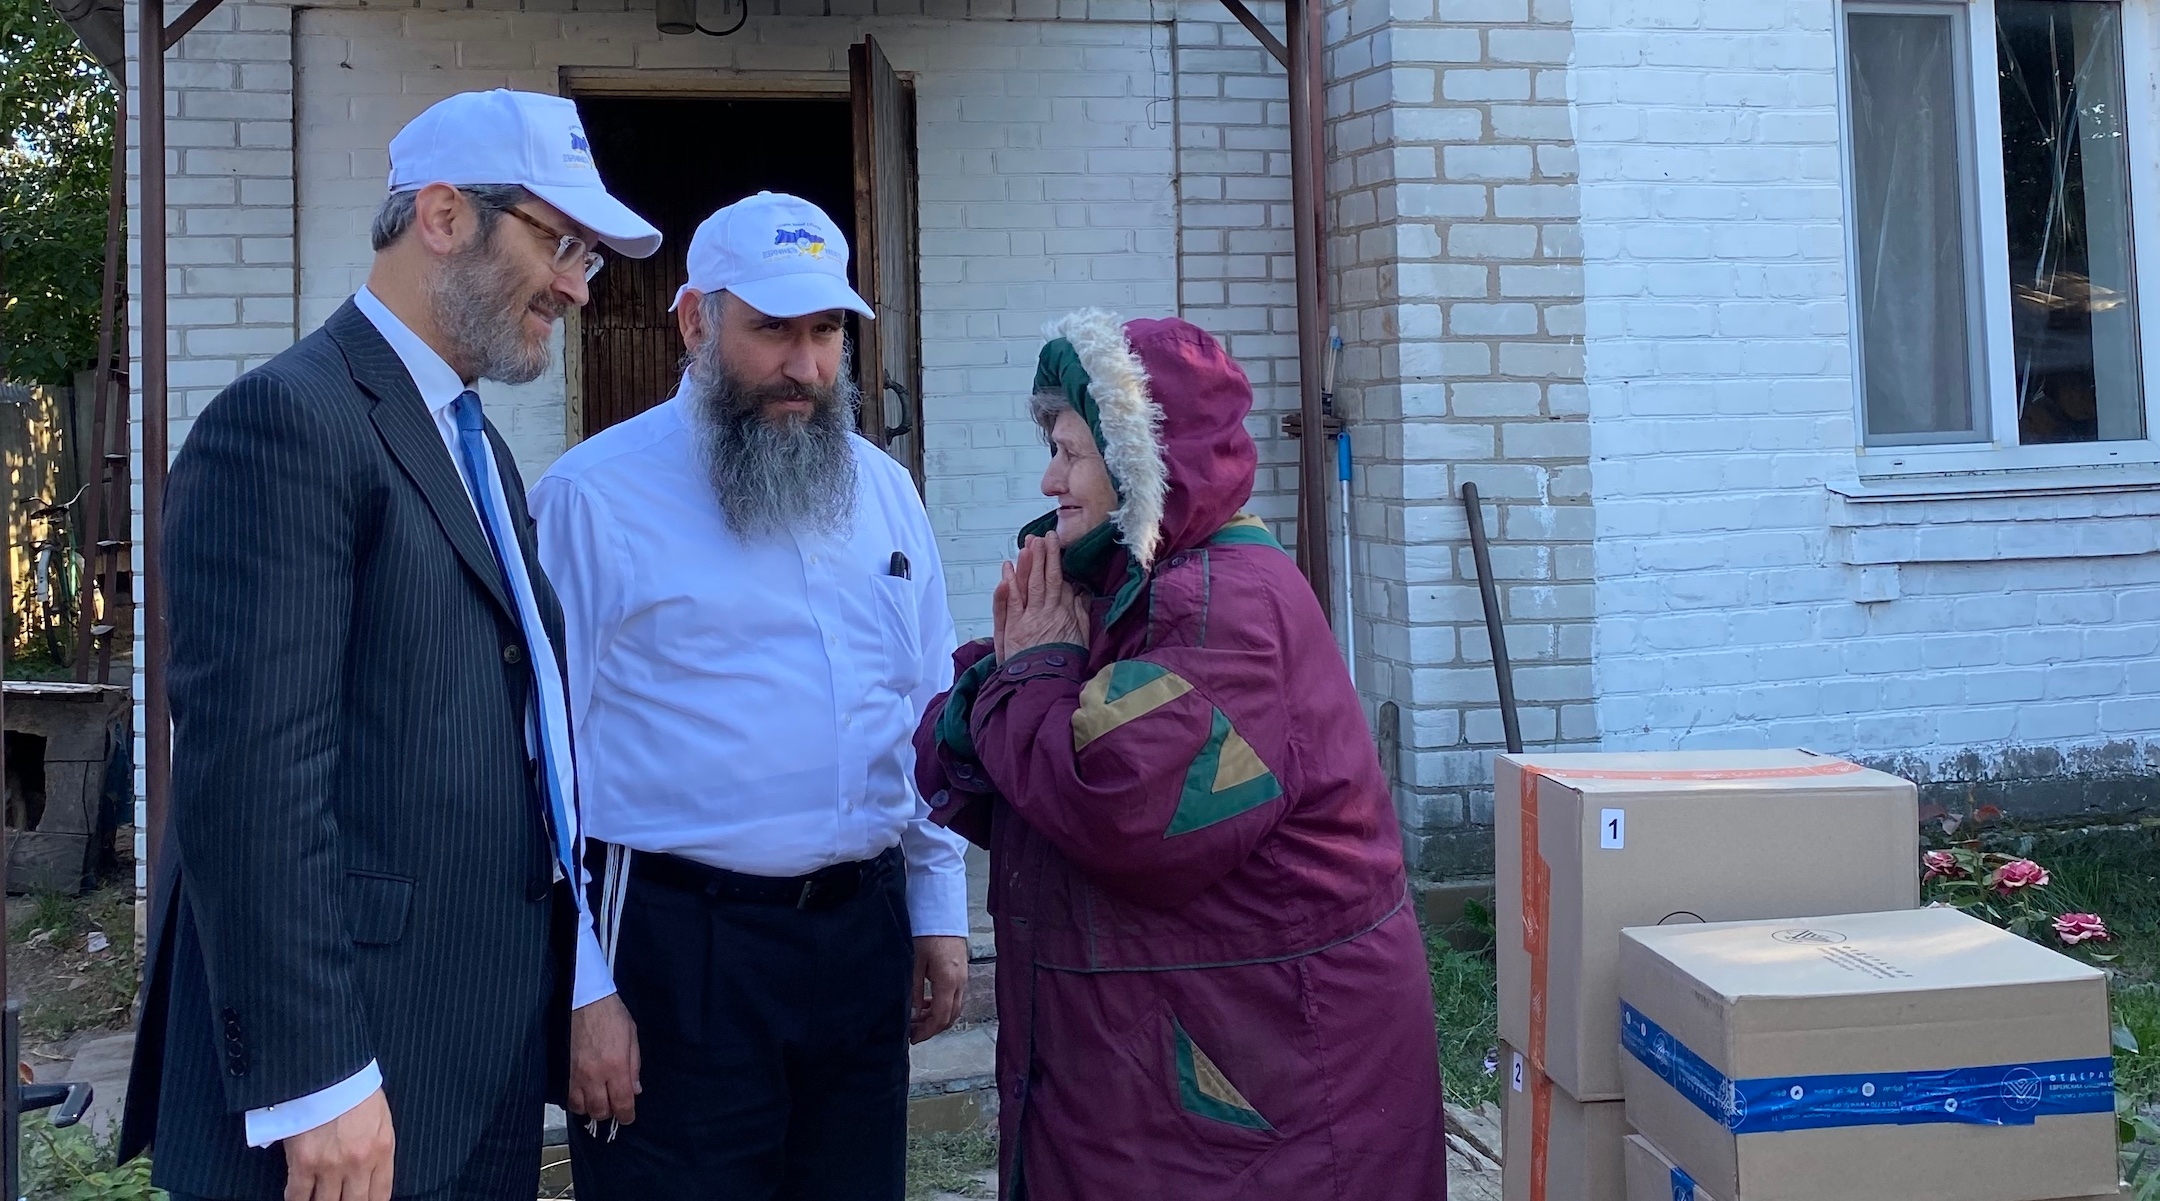 Rabbis Raphael Rotman, left, and Meir Stambler, both from the Federation of Jewish Communities of Ukraine, deliver boxes to an elderly non-Jewish Ukrainian woman in Bucha who has been receiving their aid for months. (Jacob Judah)